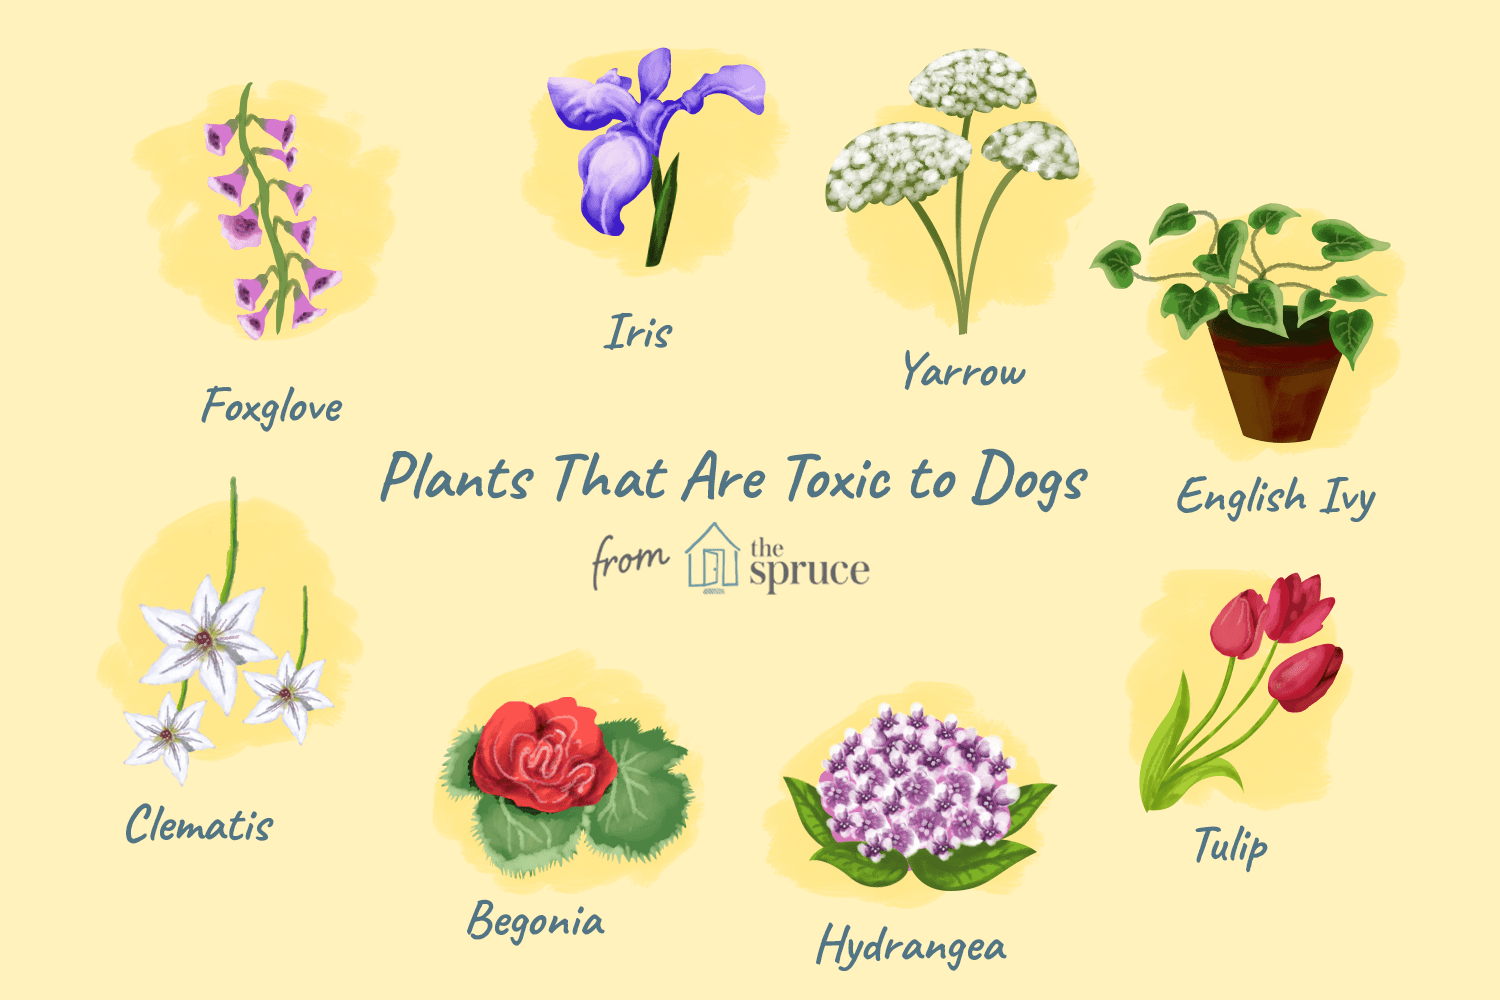 Are Flowers Poisonous To Dogs